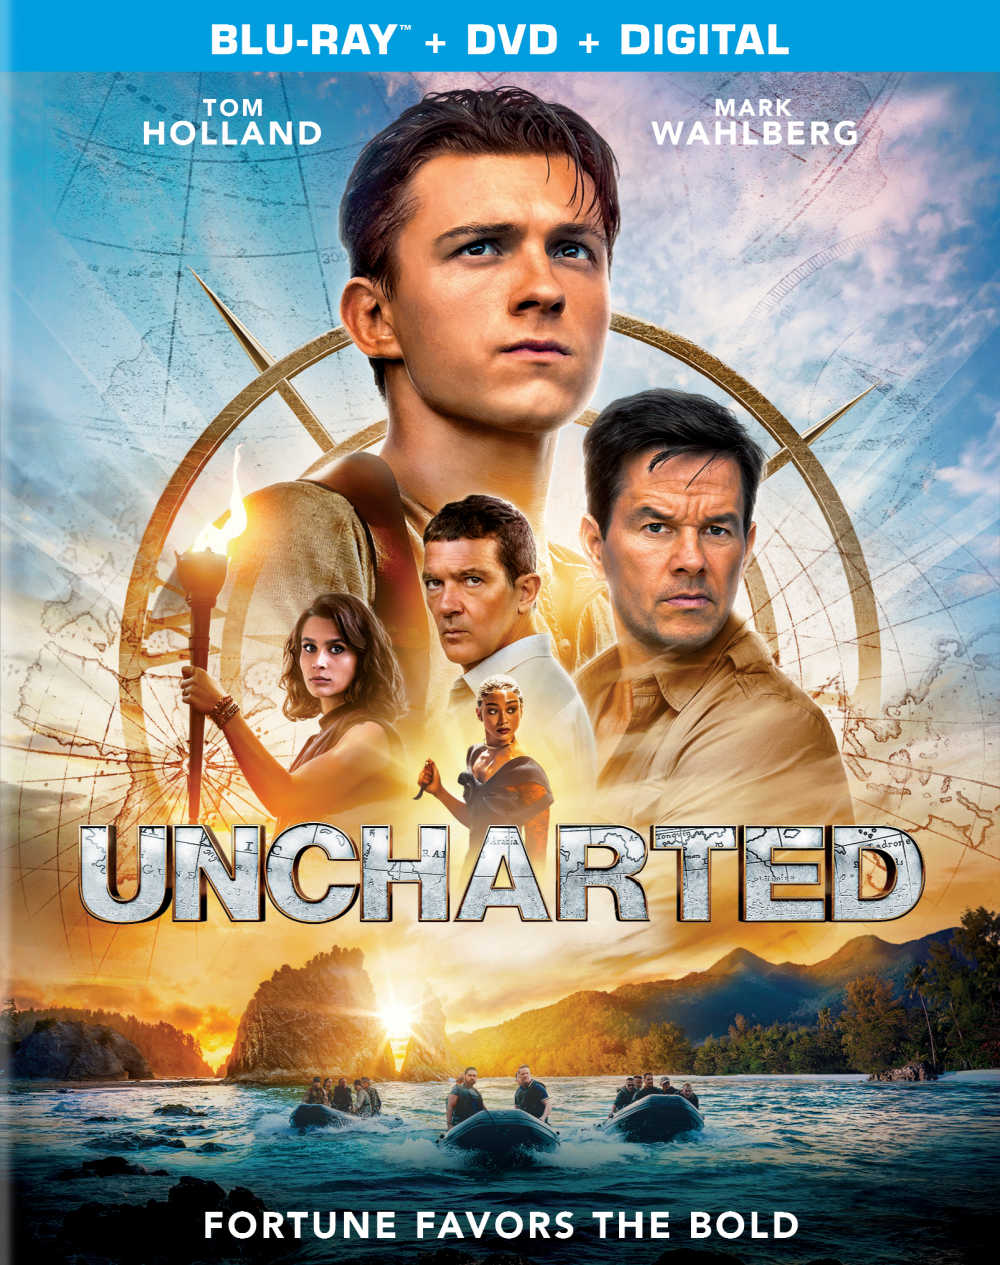 It's time for action and adventure, since Uncharted (the movie based on the video game series) is now available for home viewing. 